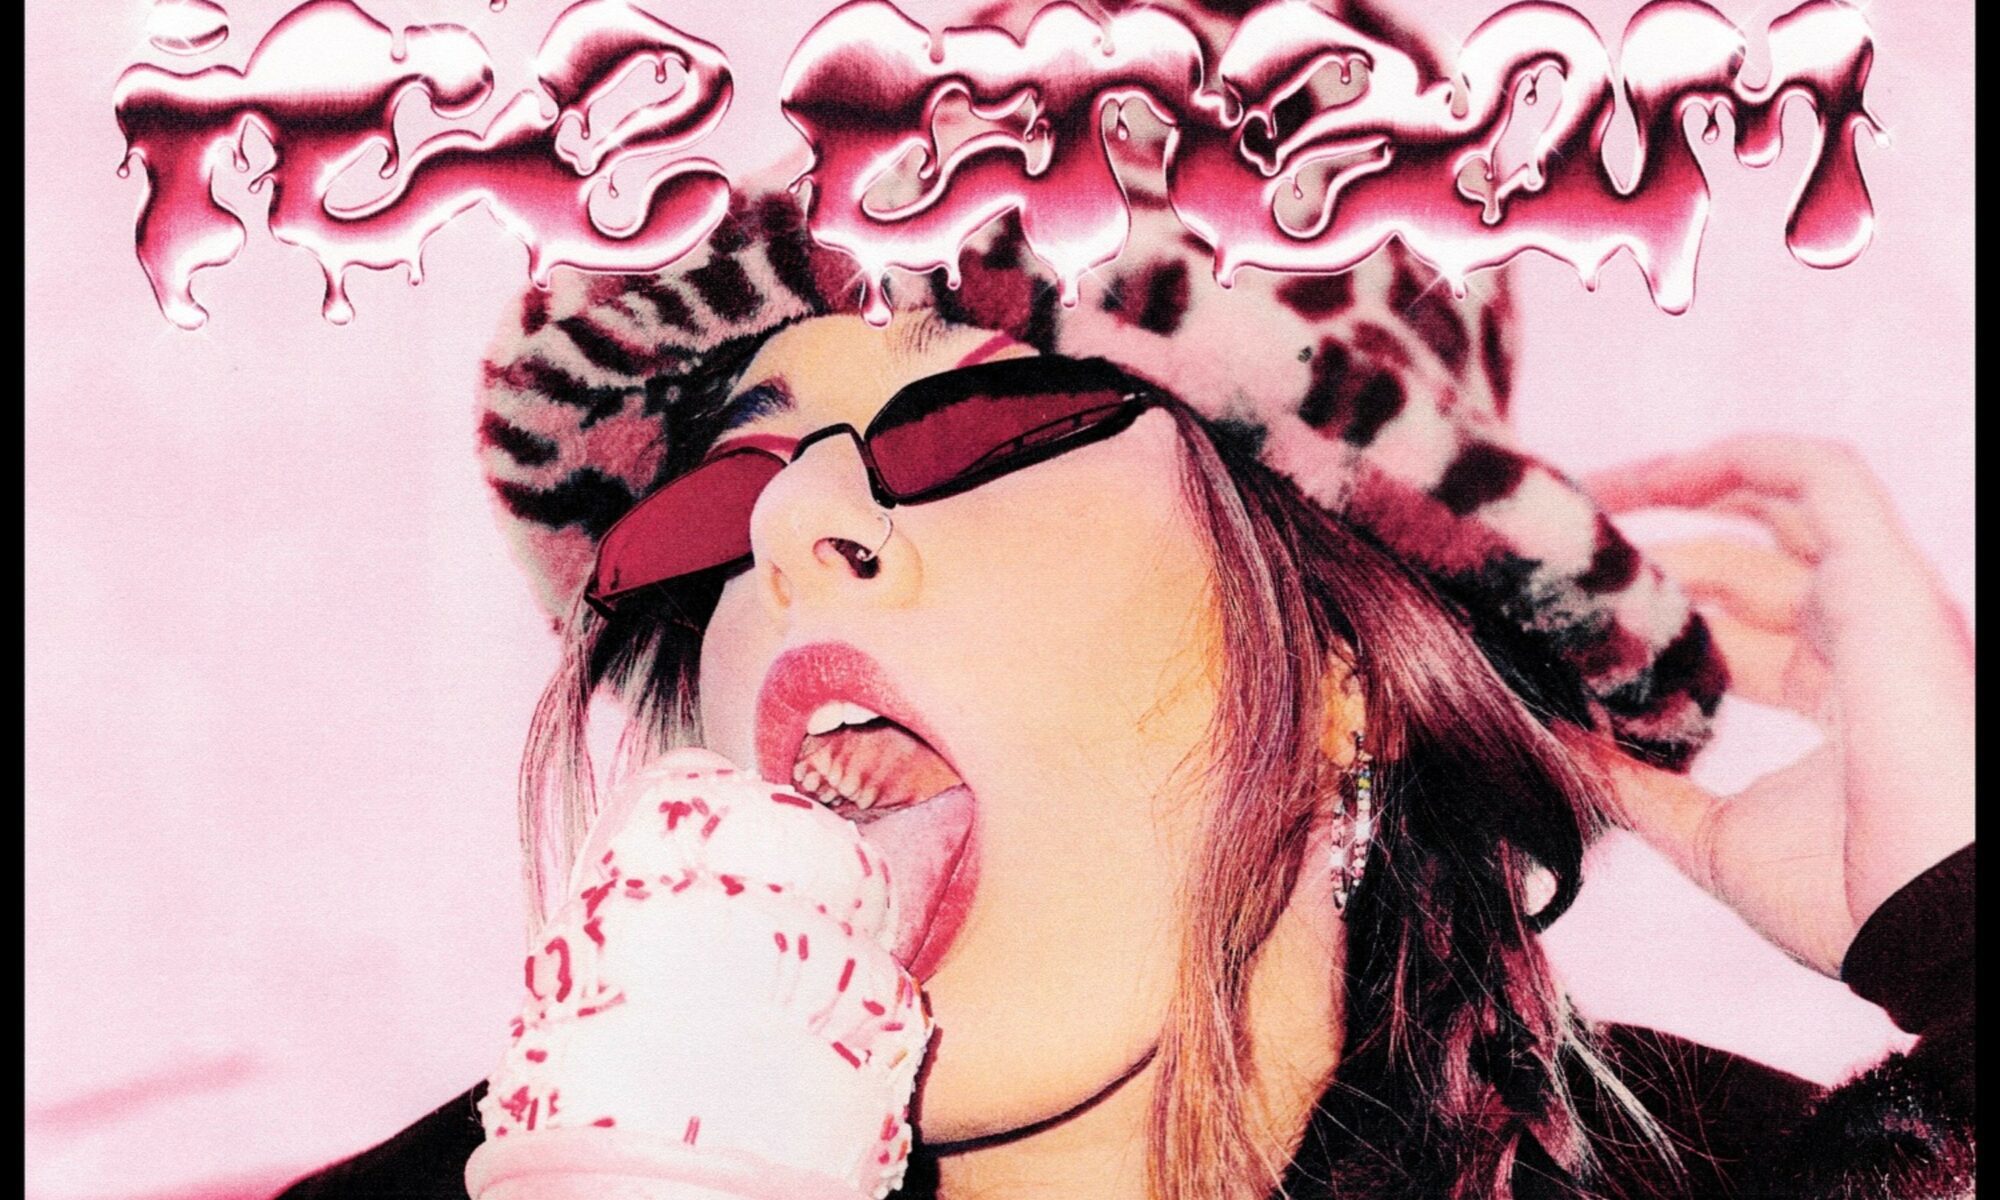 Maggie Andrew music single cover for Biting Ice Cream